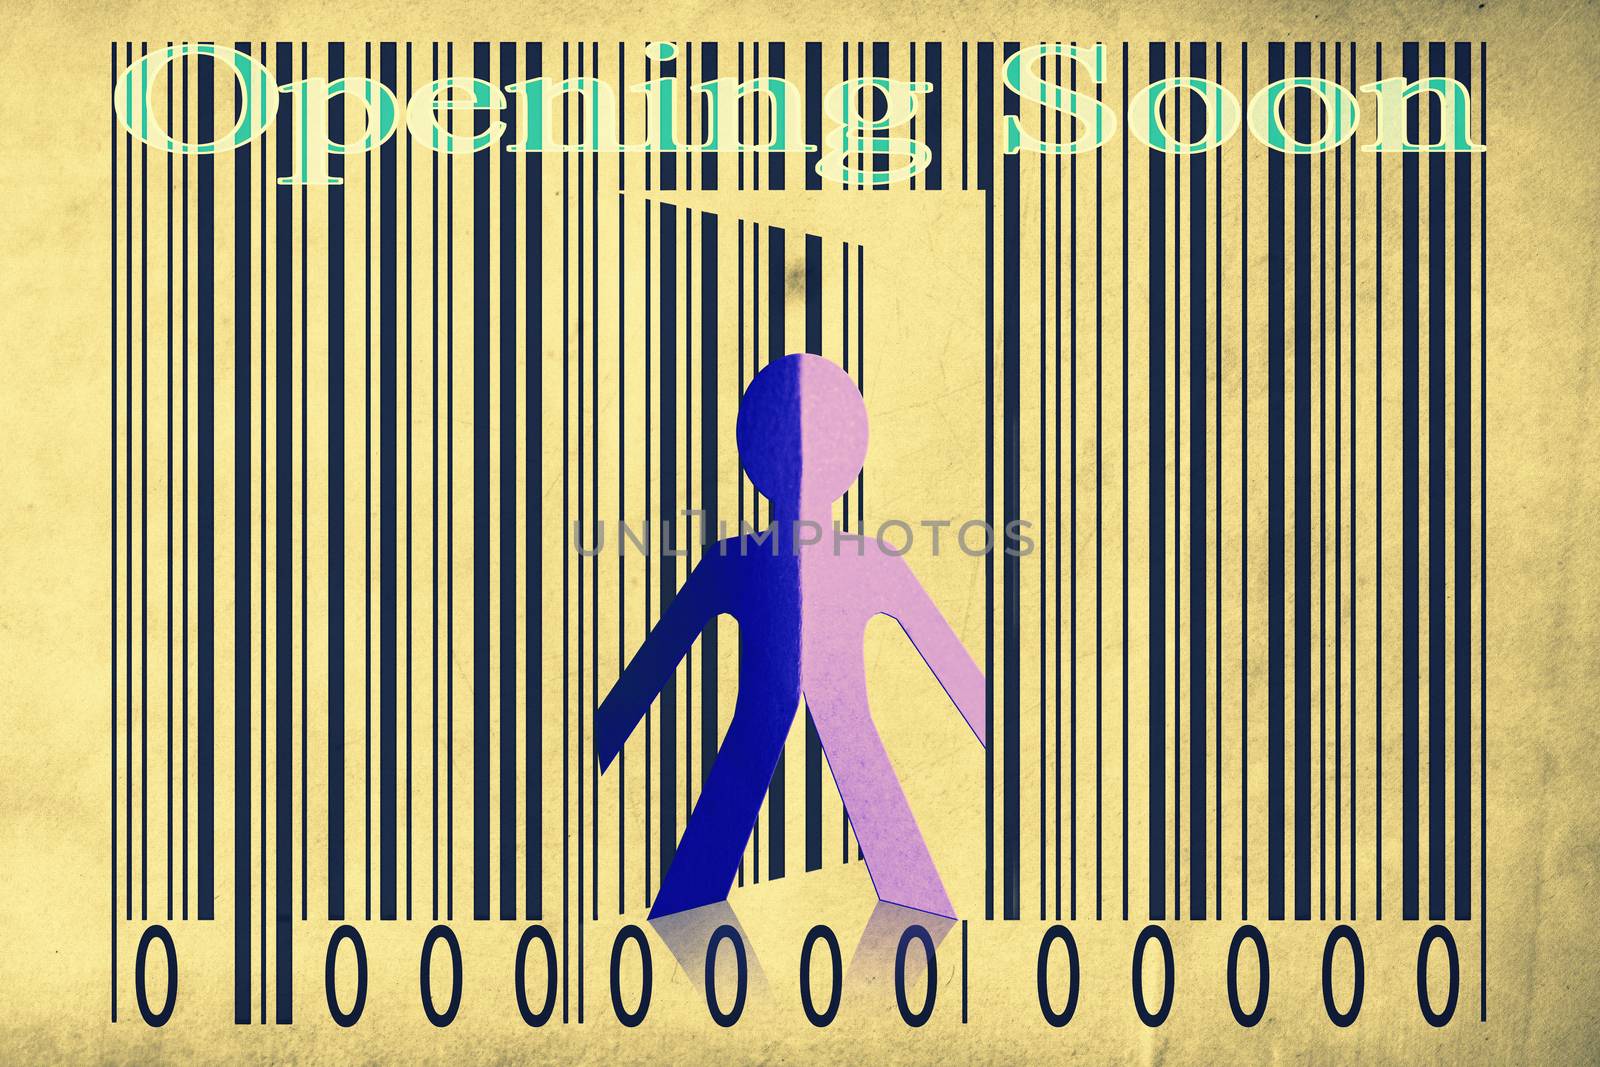 Paperman coming out of a bar code with Opening soon Words by yands